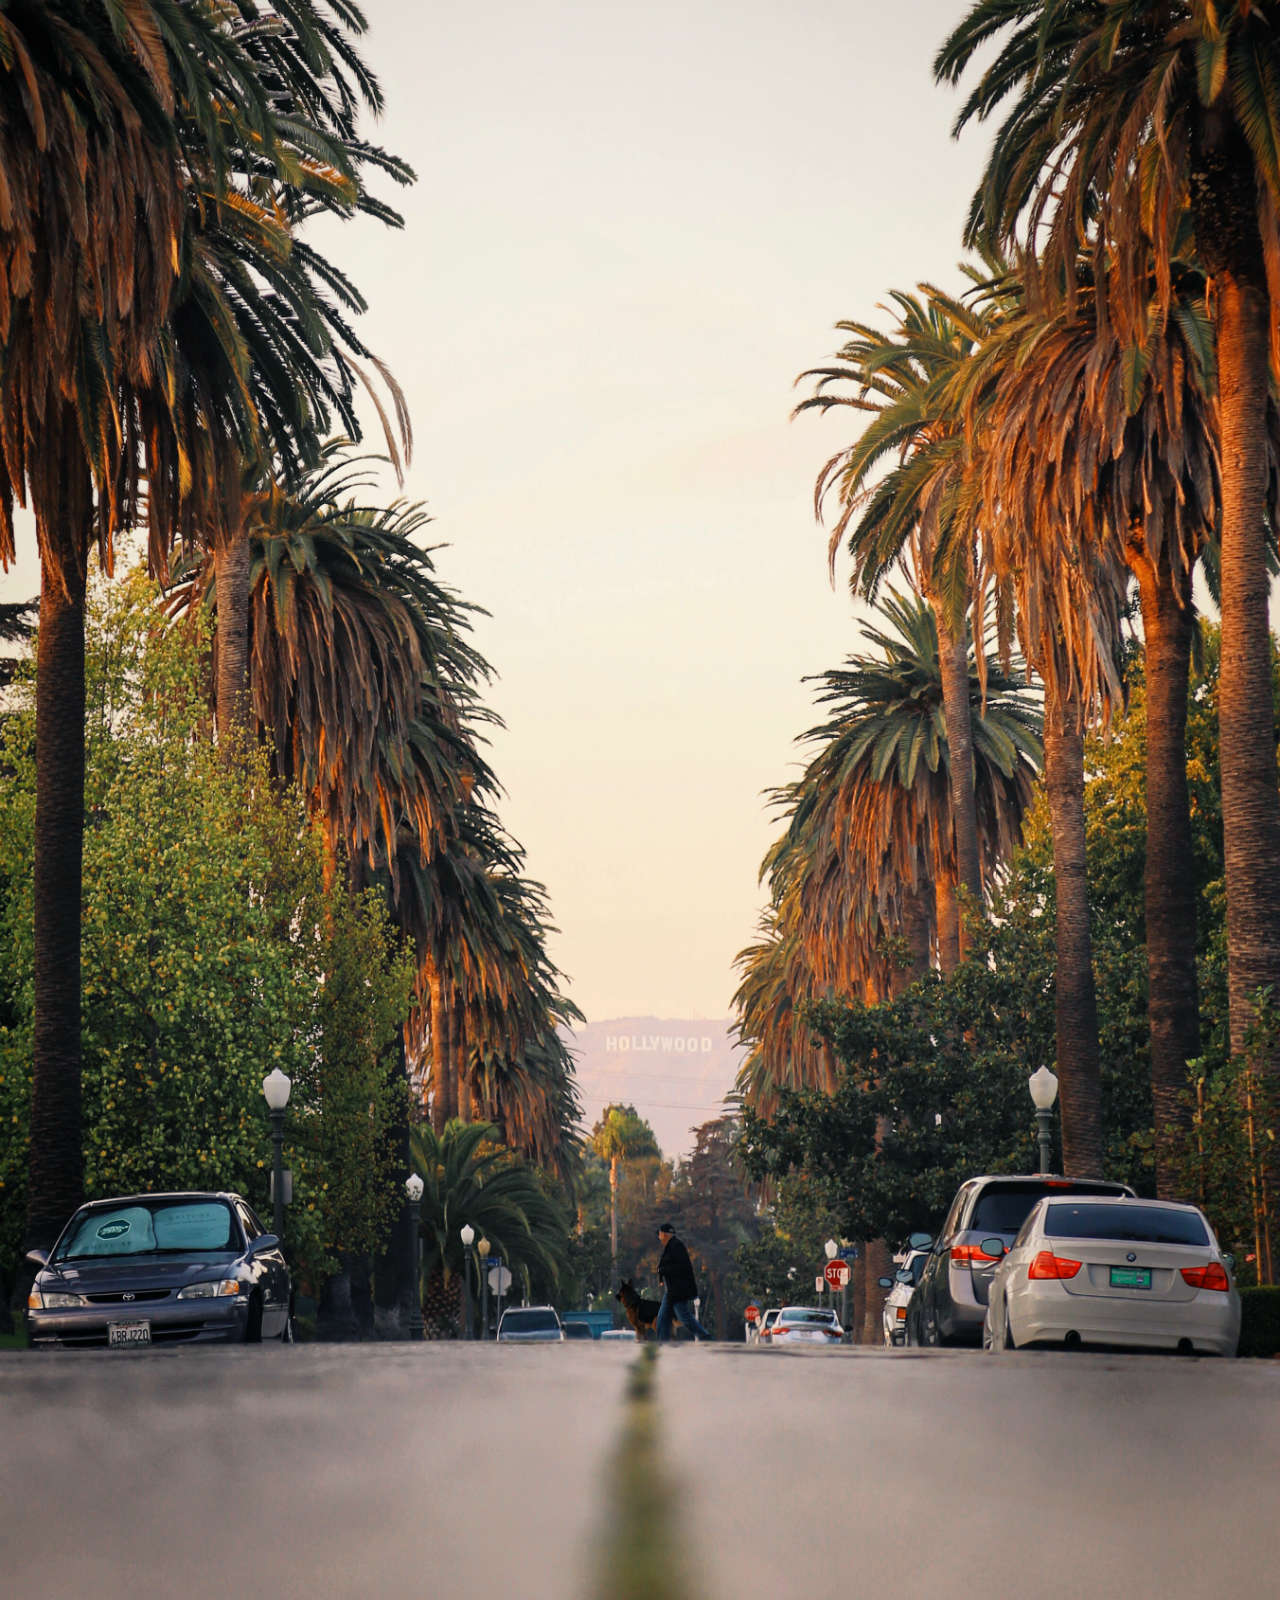 Instagram Los Angeles: 15 places for the best vacation photos – IHG